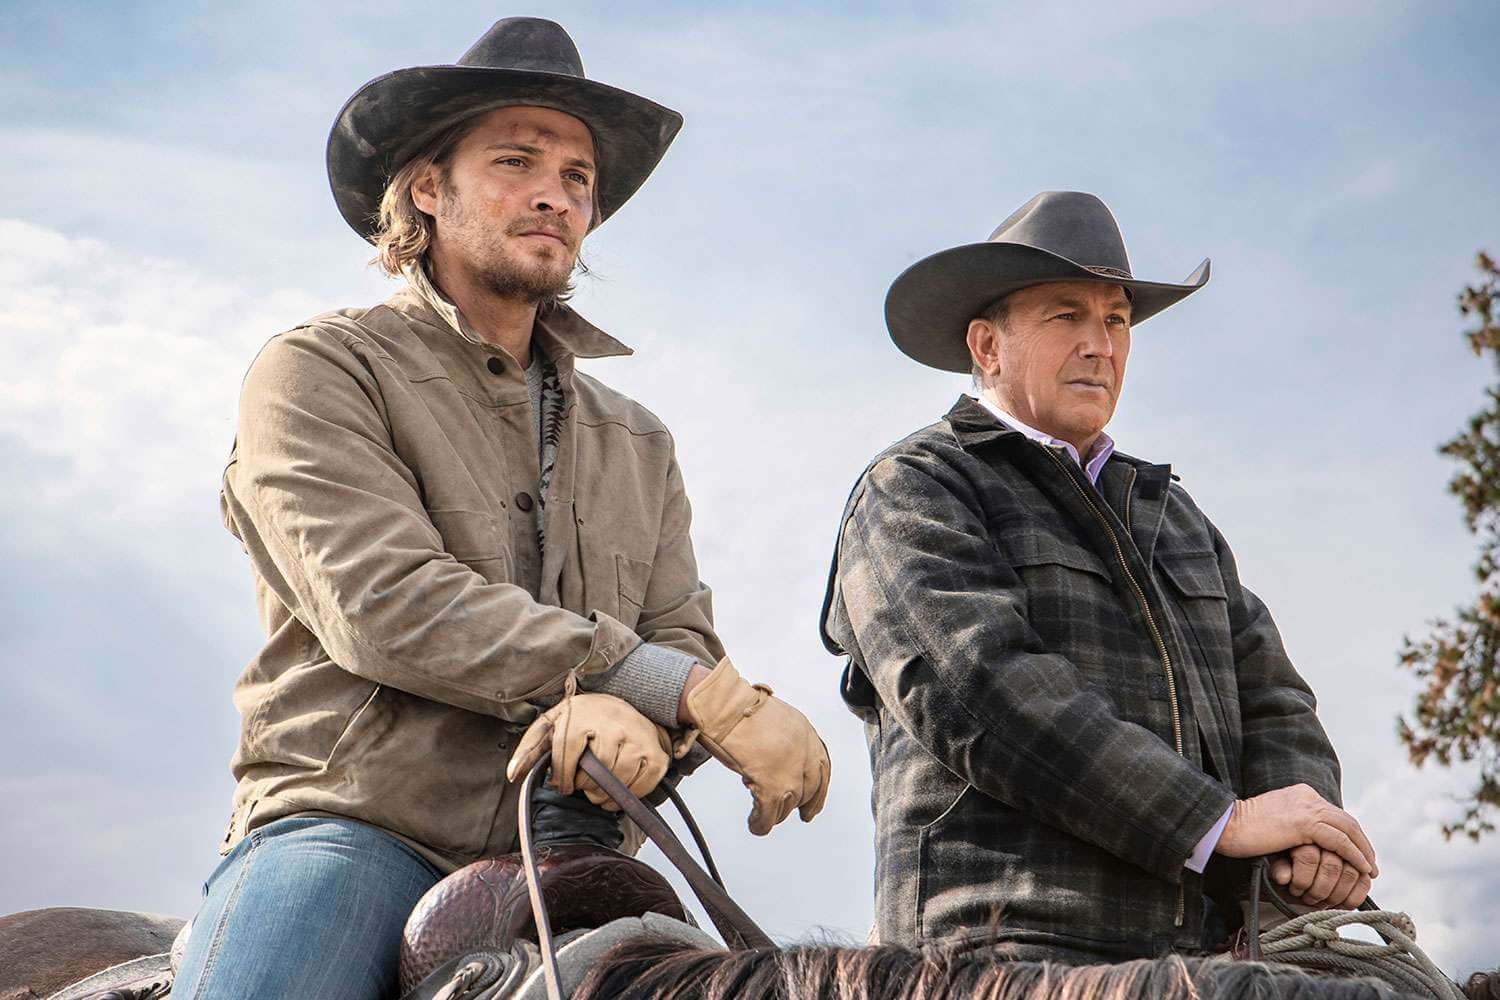 Yellowstone stars Luke Grimes and Kevin Costner as Kayce Dutton and John Dutton